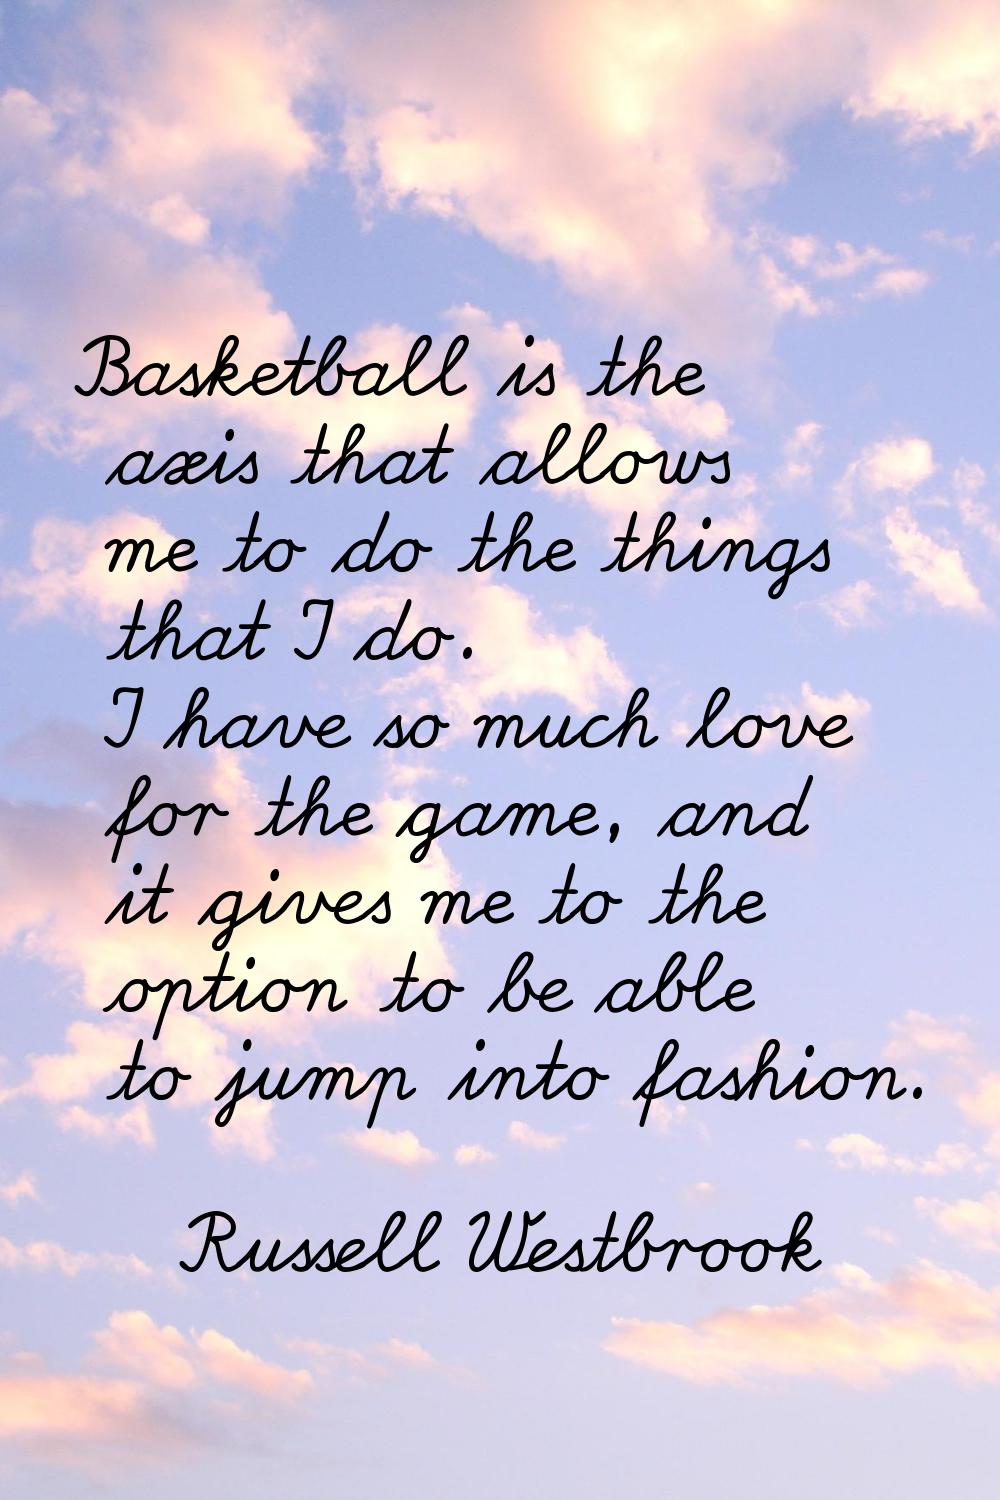 Basketball is the axis that allows me to do the things that I do. I have so much love for the game,